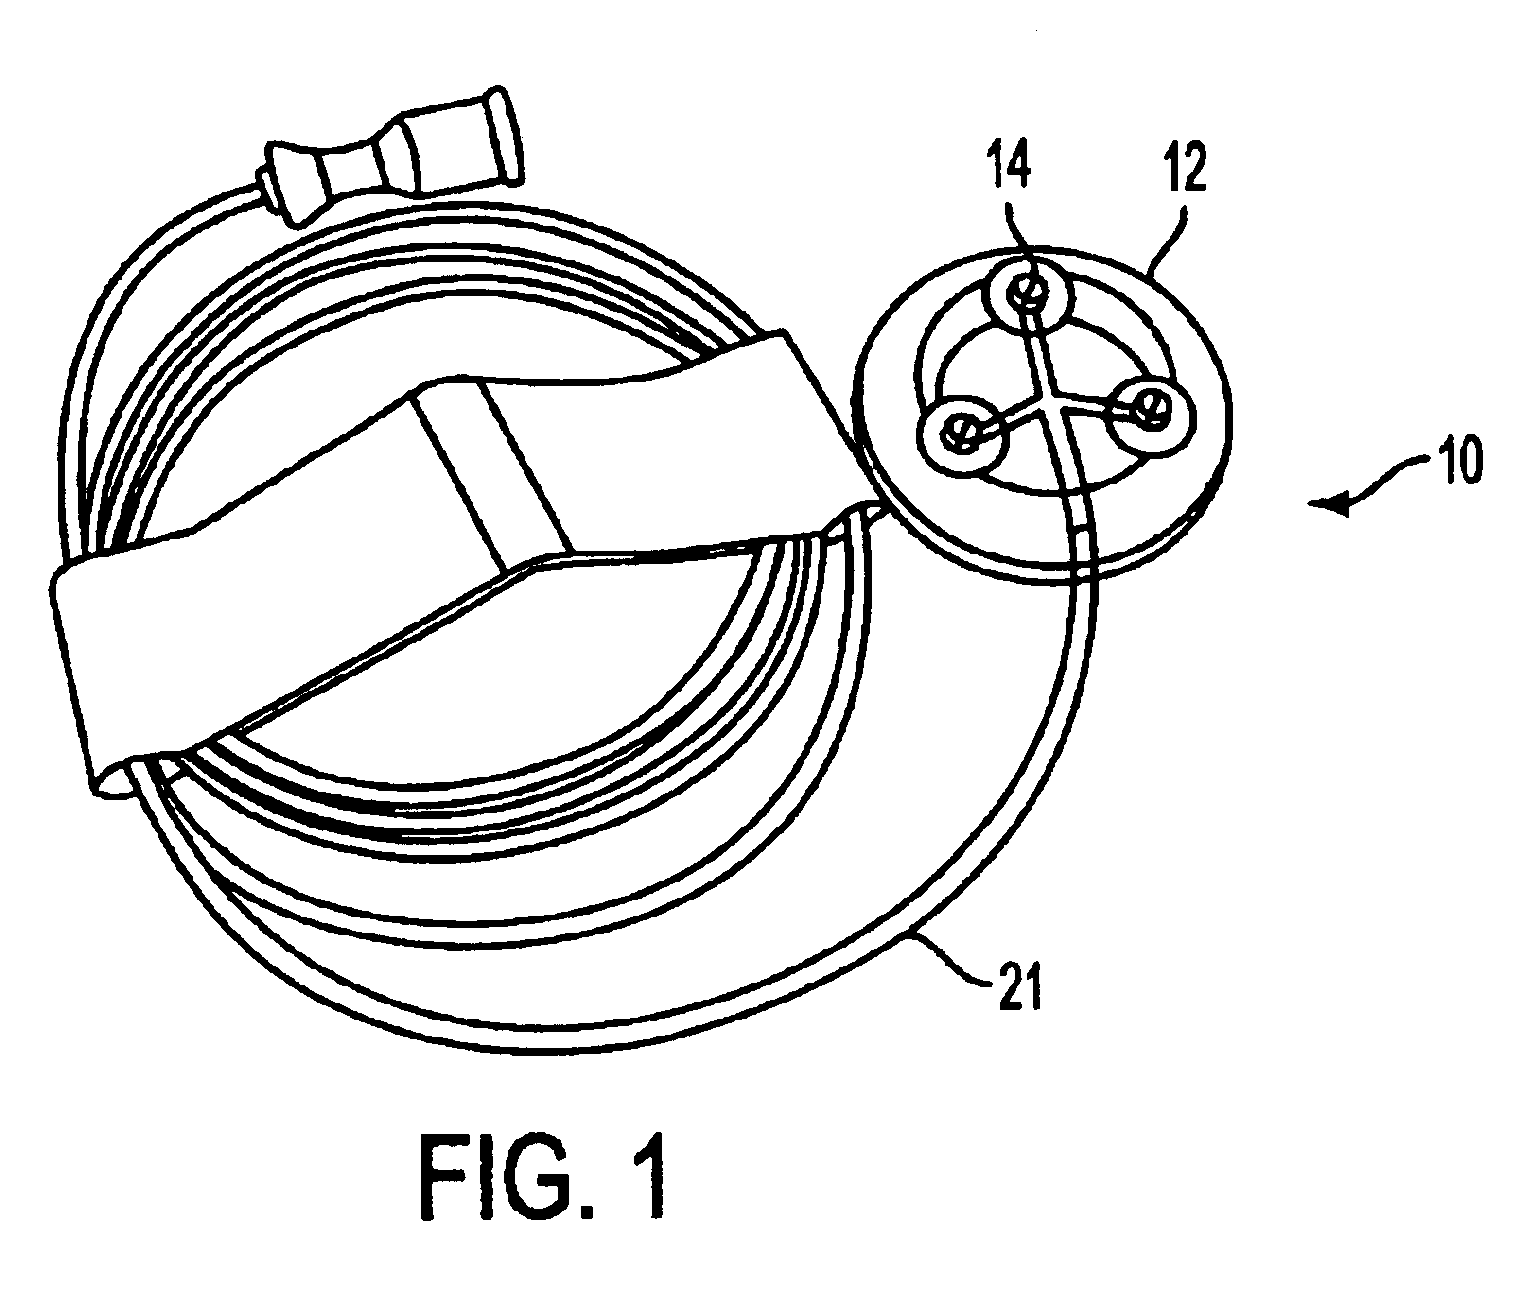 Device and method for delivering or withdrawing a substance through the skin